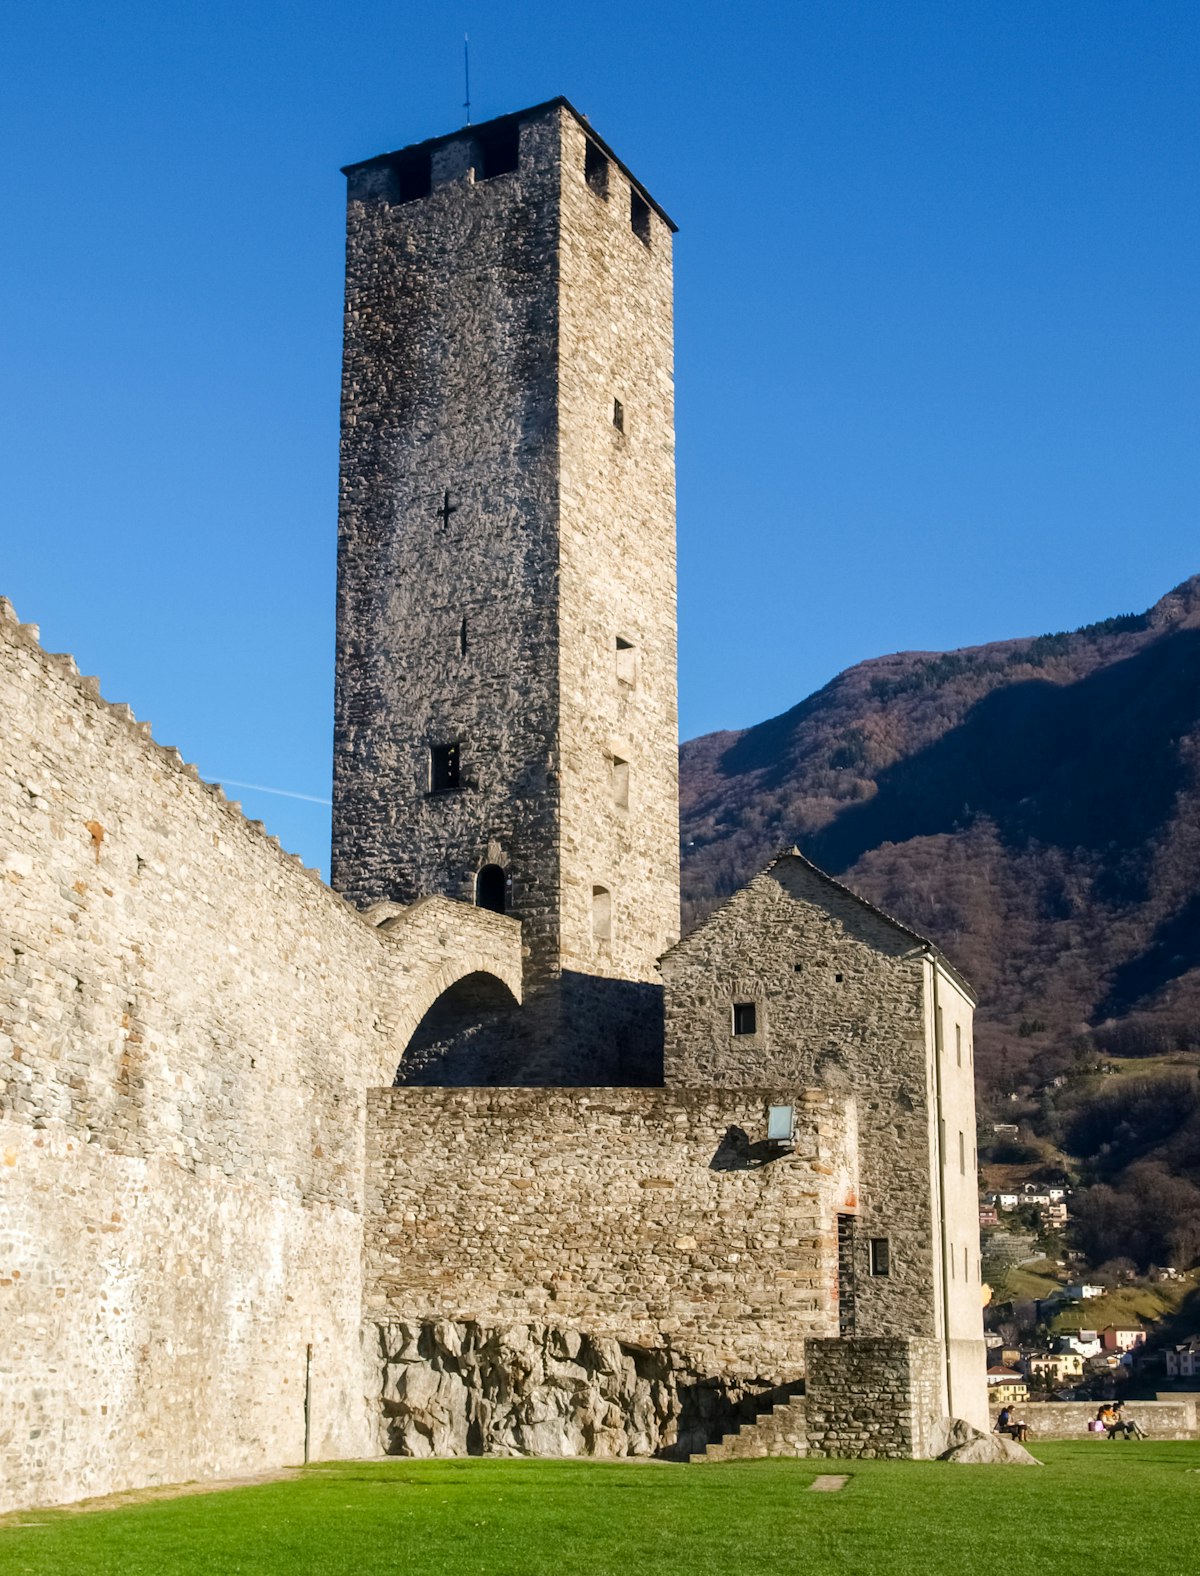 Bellinzona, Switzerland: a tower at Castelgrande with blue sky.
565916194
aged, alps, ancient, architecture, bellinzona, building, castle, church, city, culture, defense, europe, exterior, fort, fortress, hill, historic, historical, history, house, landmark, medieval, monument, mountain, old, outdoor, rock, ruins, stone, swiss, switzerland, ticino, tourism, tourist, tower, town, travel, urban, wall